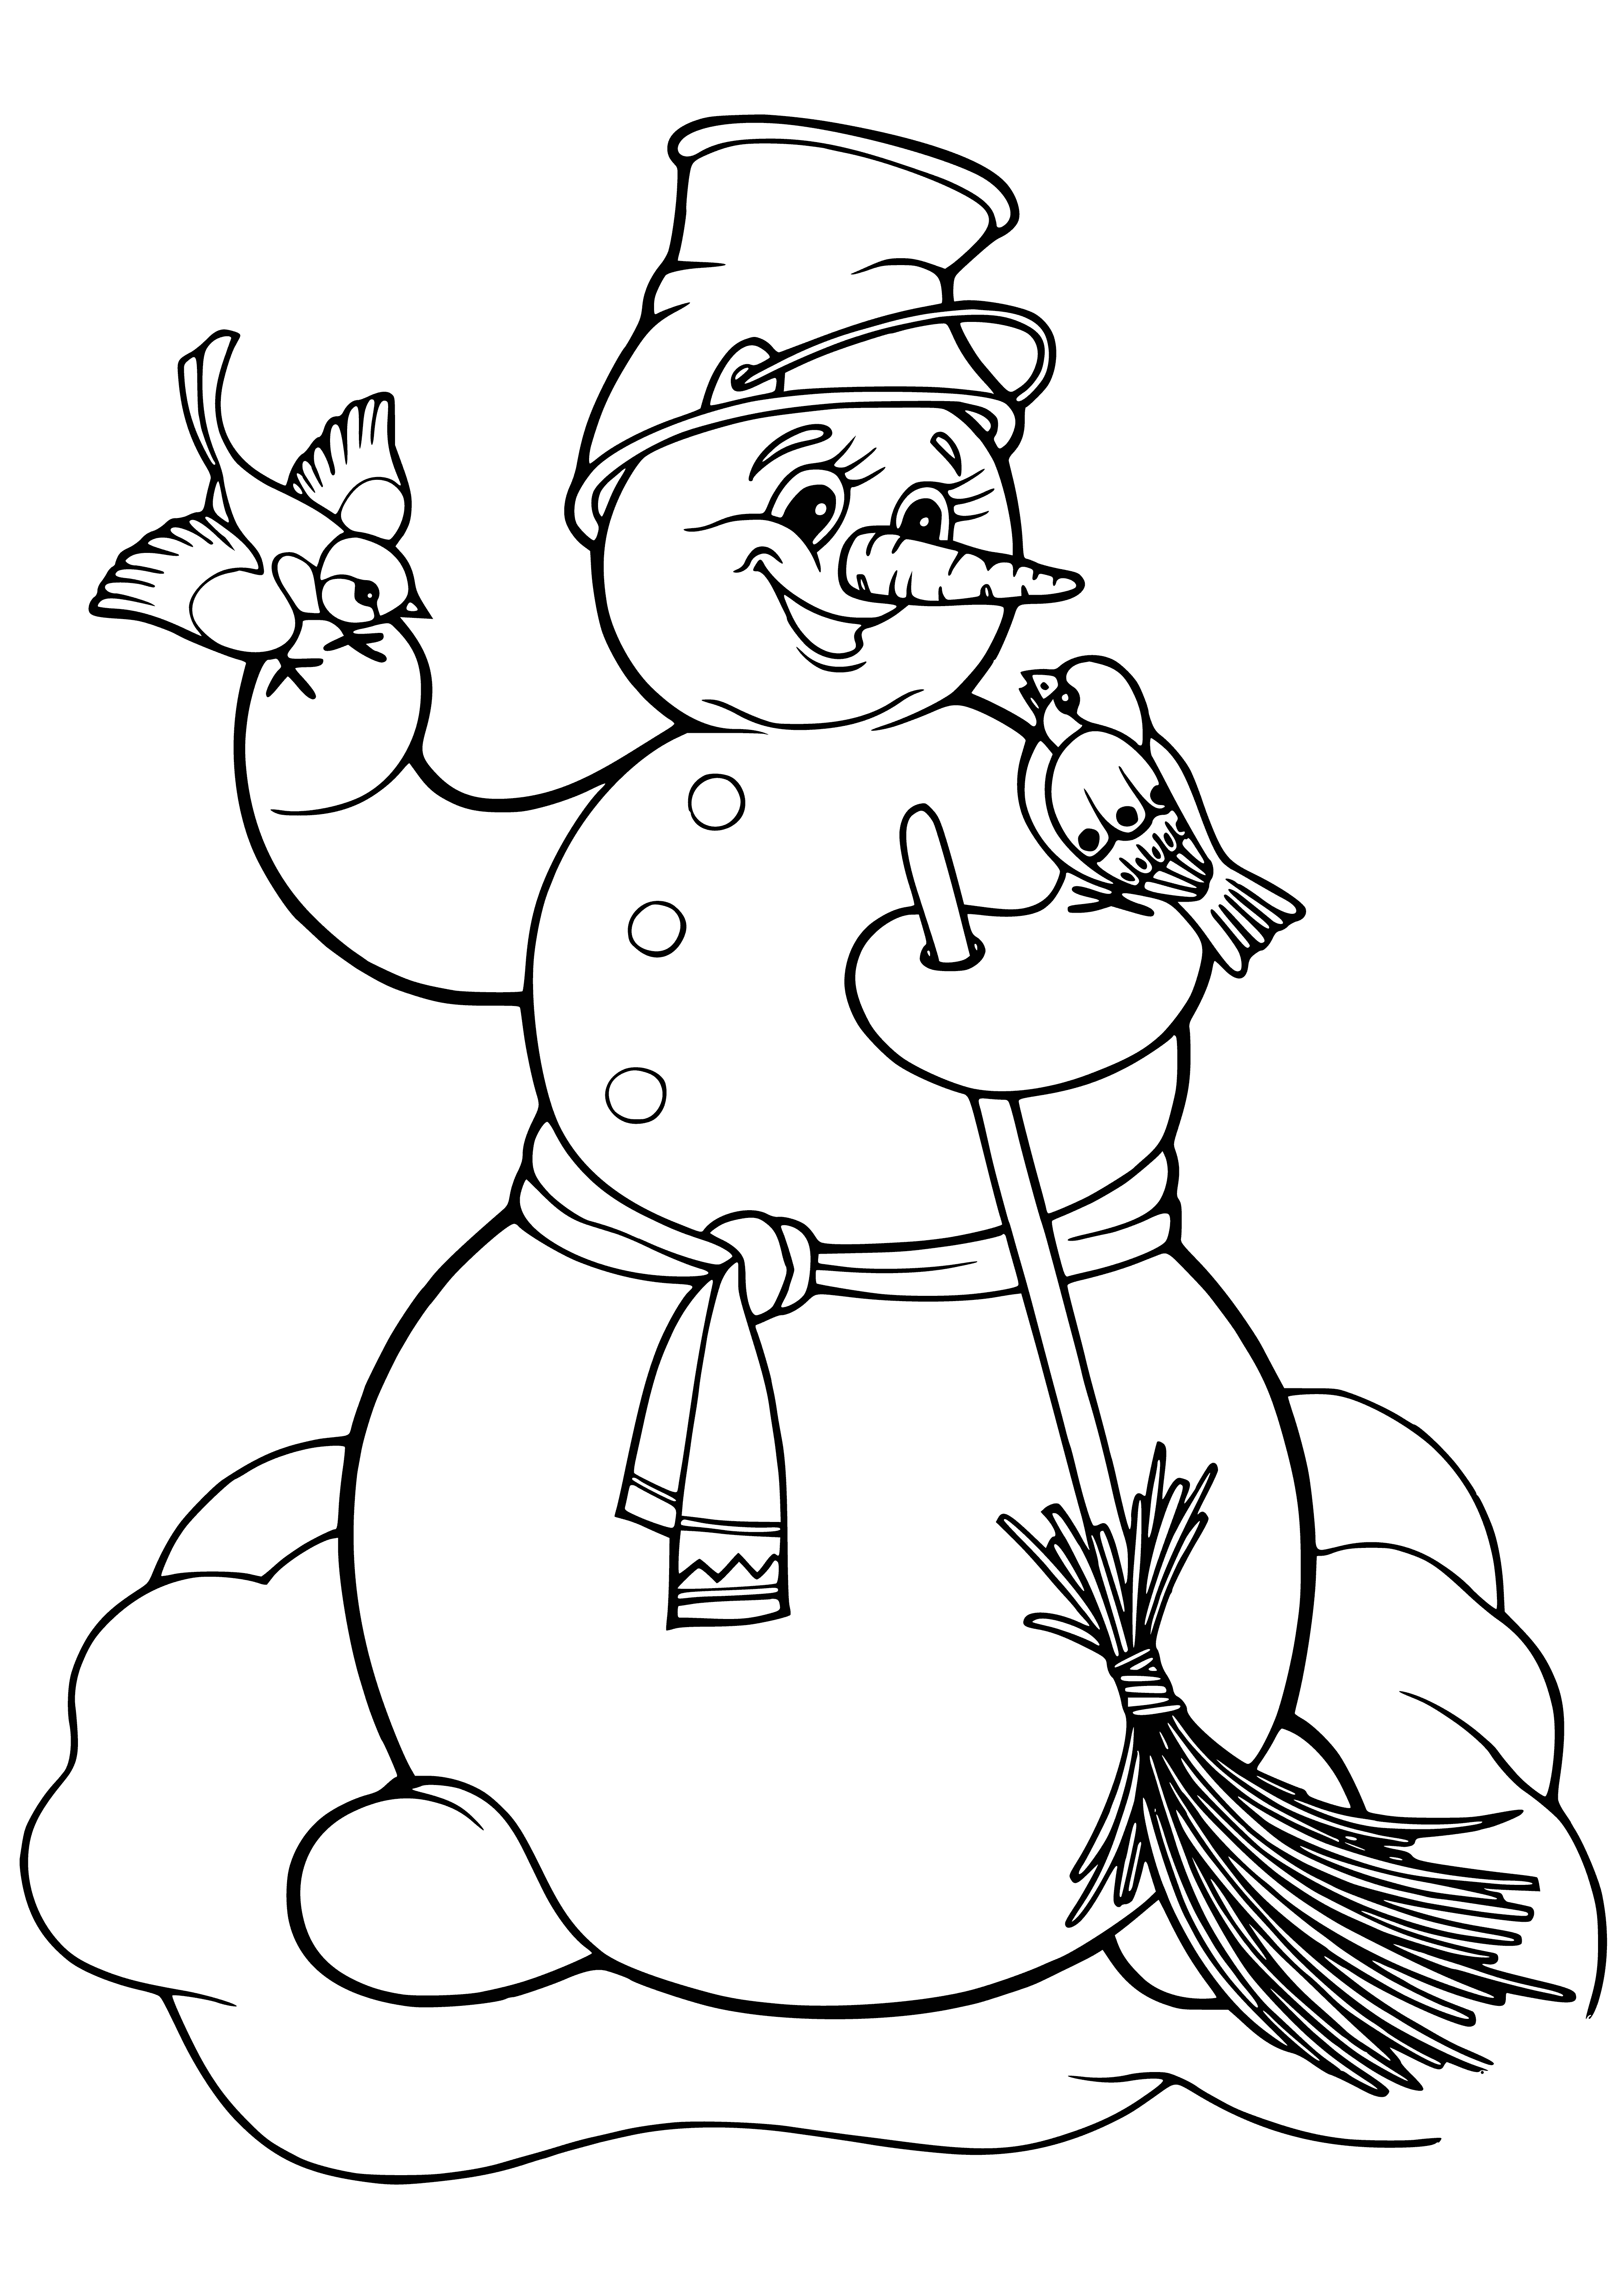 coloring page: A snowman with carrot nose, coal eyes, scarf - a winter classic!